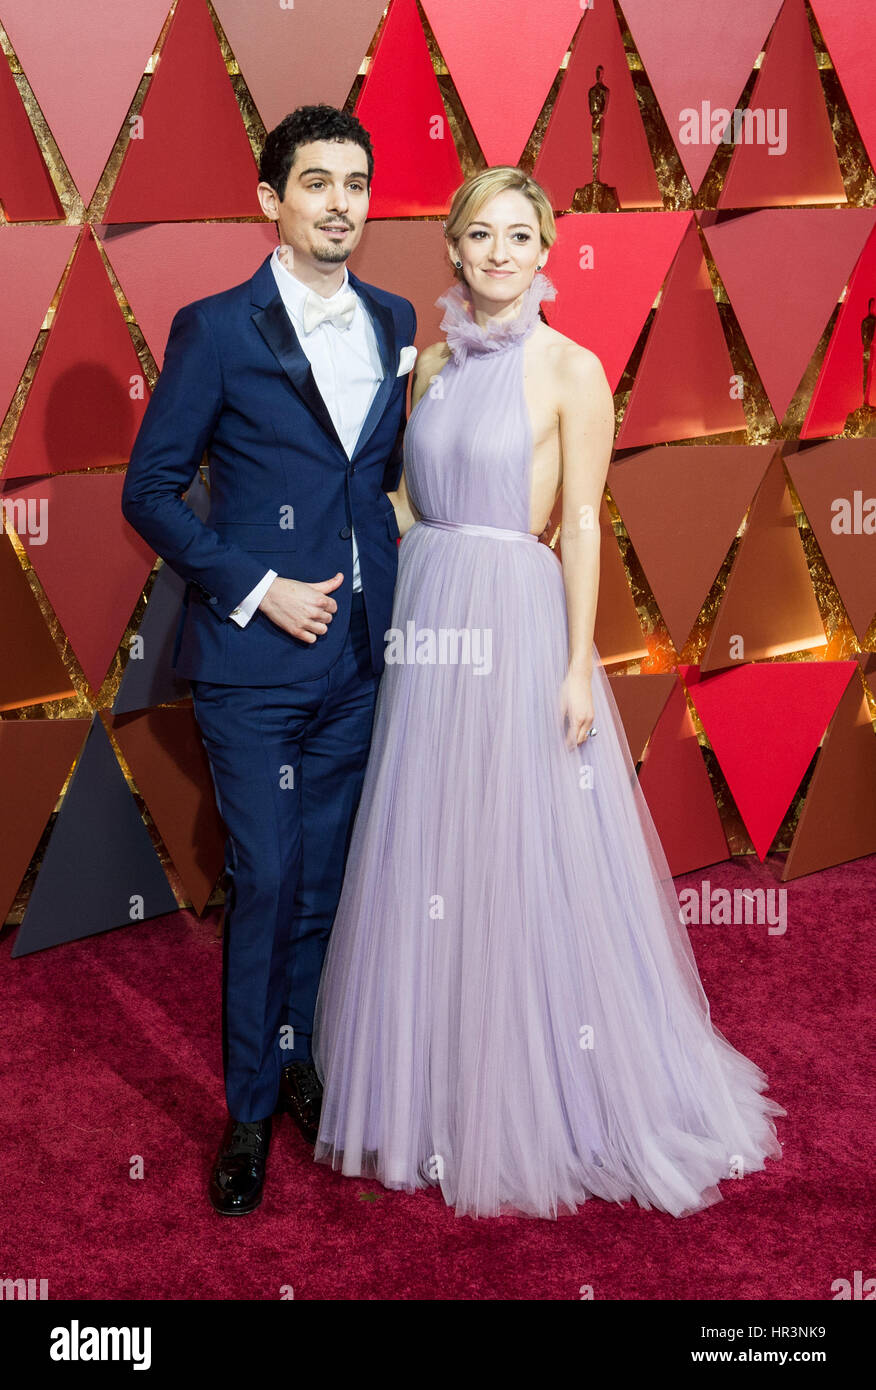 Los Angeles, USA. 26th Feb, 2017. Director Damien Chazelle(L) and actress Olivia Hamilton arrive for the red carpet of the 89th Academy Awards at the Dolby Theater in Los Angeles, the United States, on Feb. 26, 2017. Credit: Yang Lei/Xinhua/Alamy Live News Stock Photo